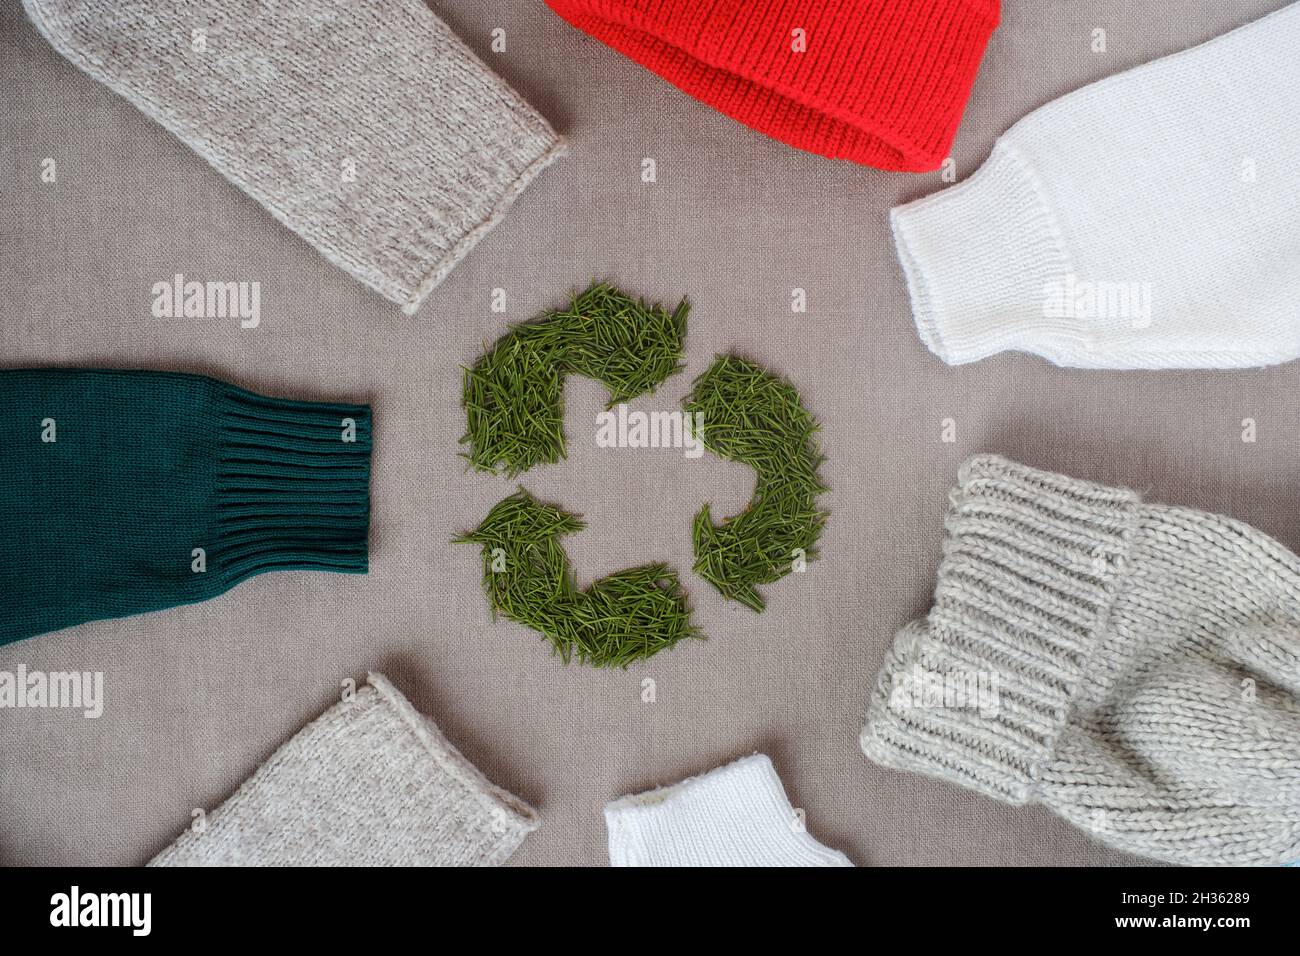 Recycling sign with Christmas tree needles. Winter recycling clothes. Top view or flat lay. Stock Photo